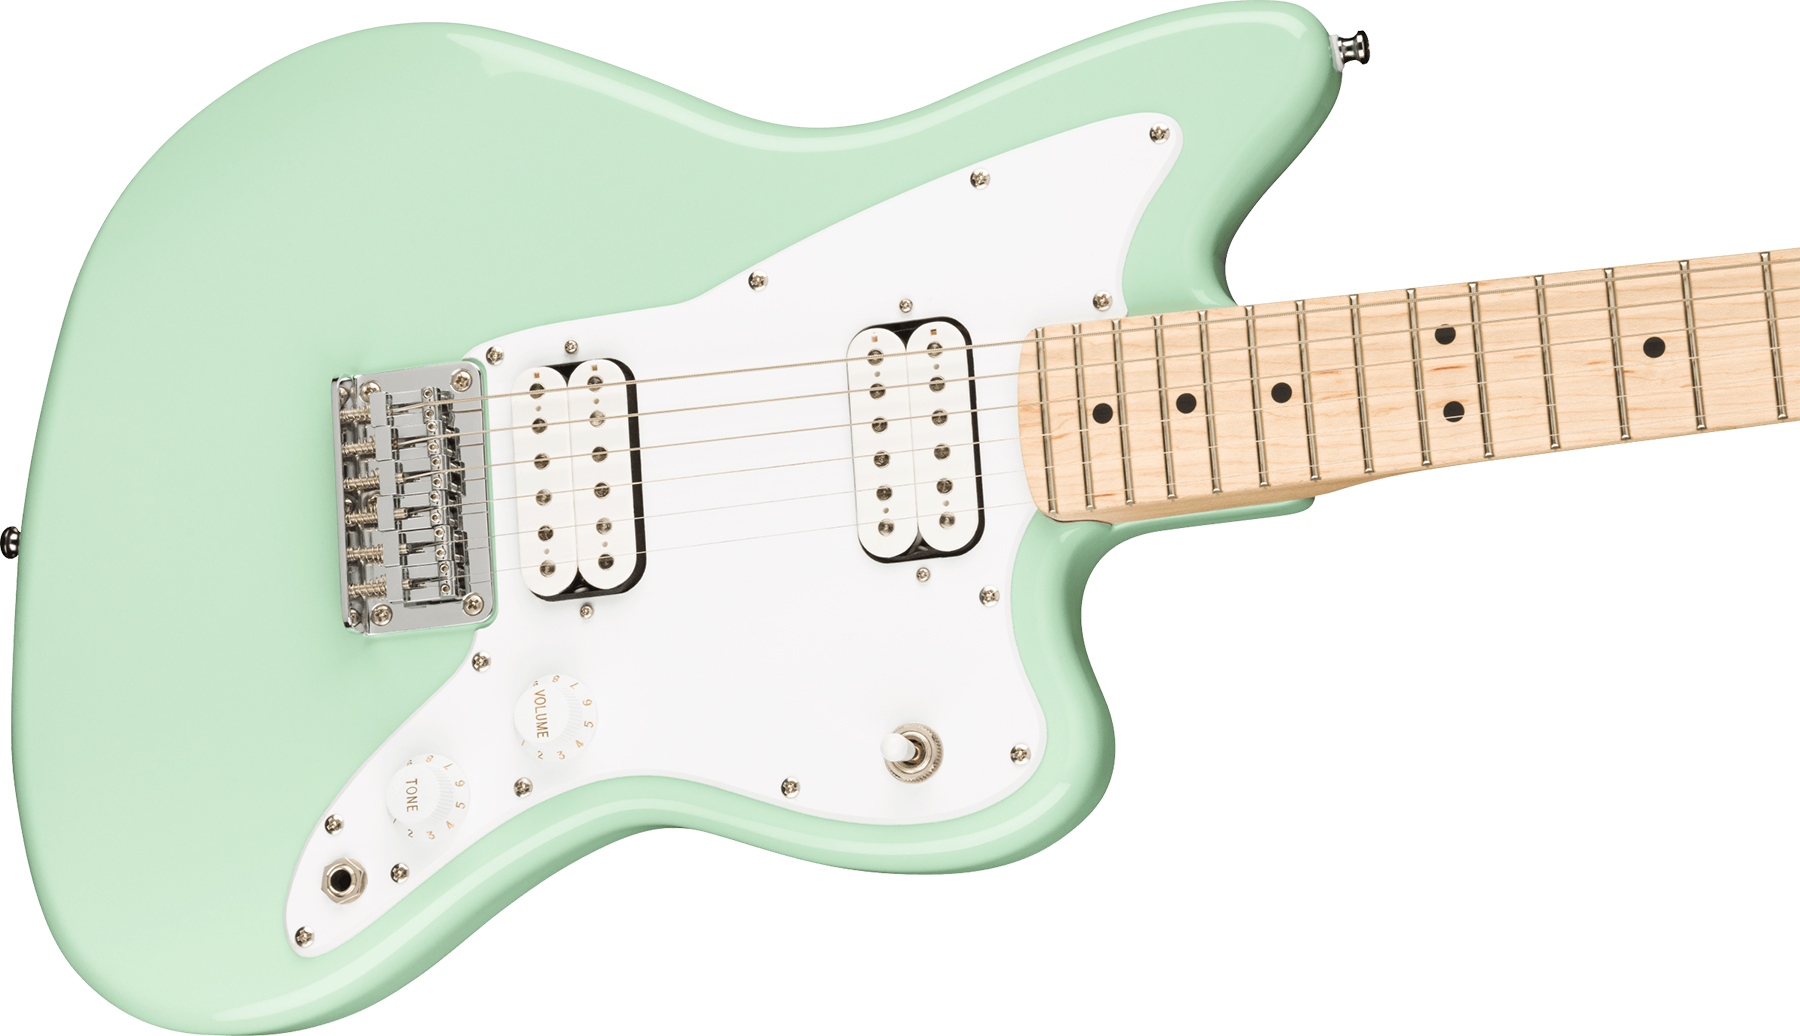 Squier Mini Jazzmaster Bullet Hh Ht Mn - Surf Green - Electric guitar for kids - Variation 2